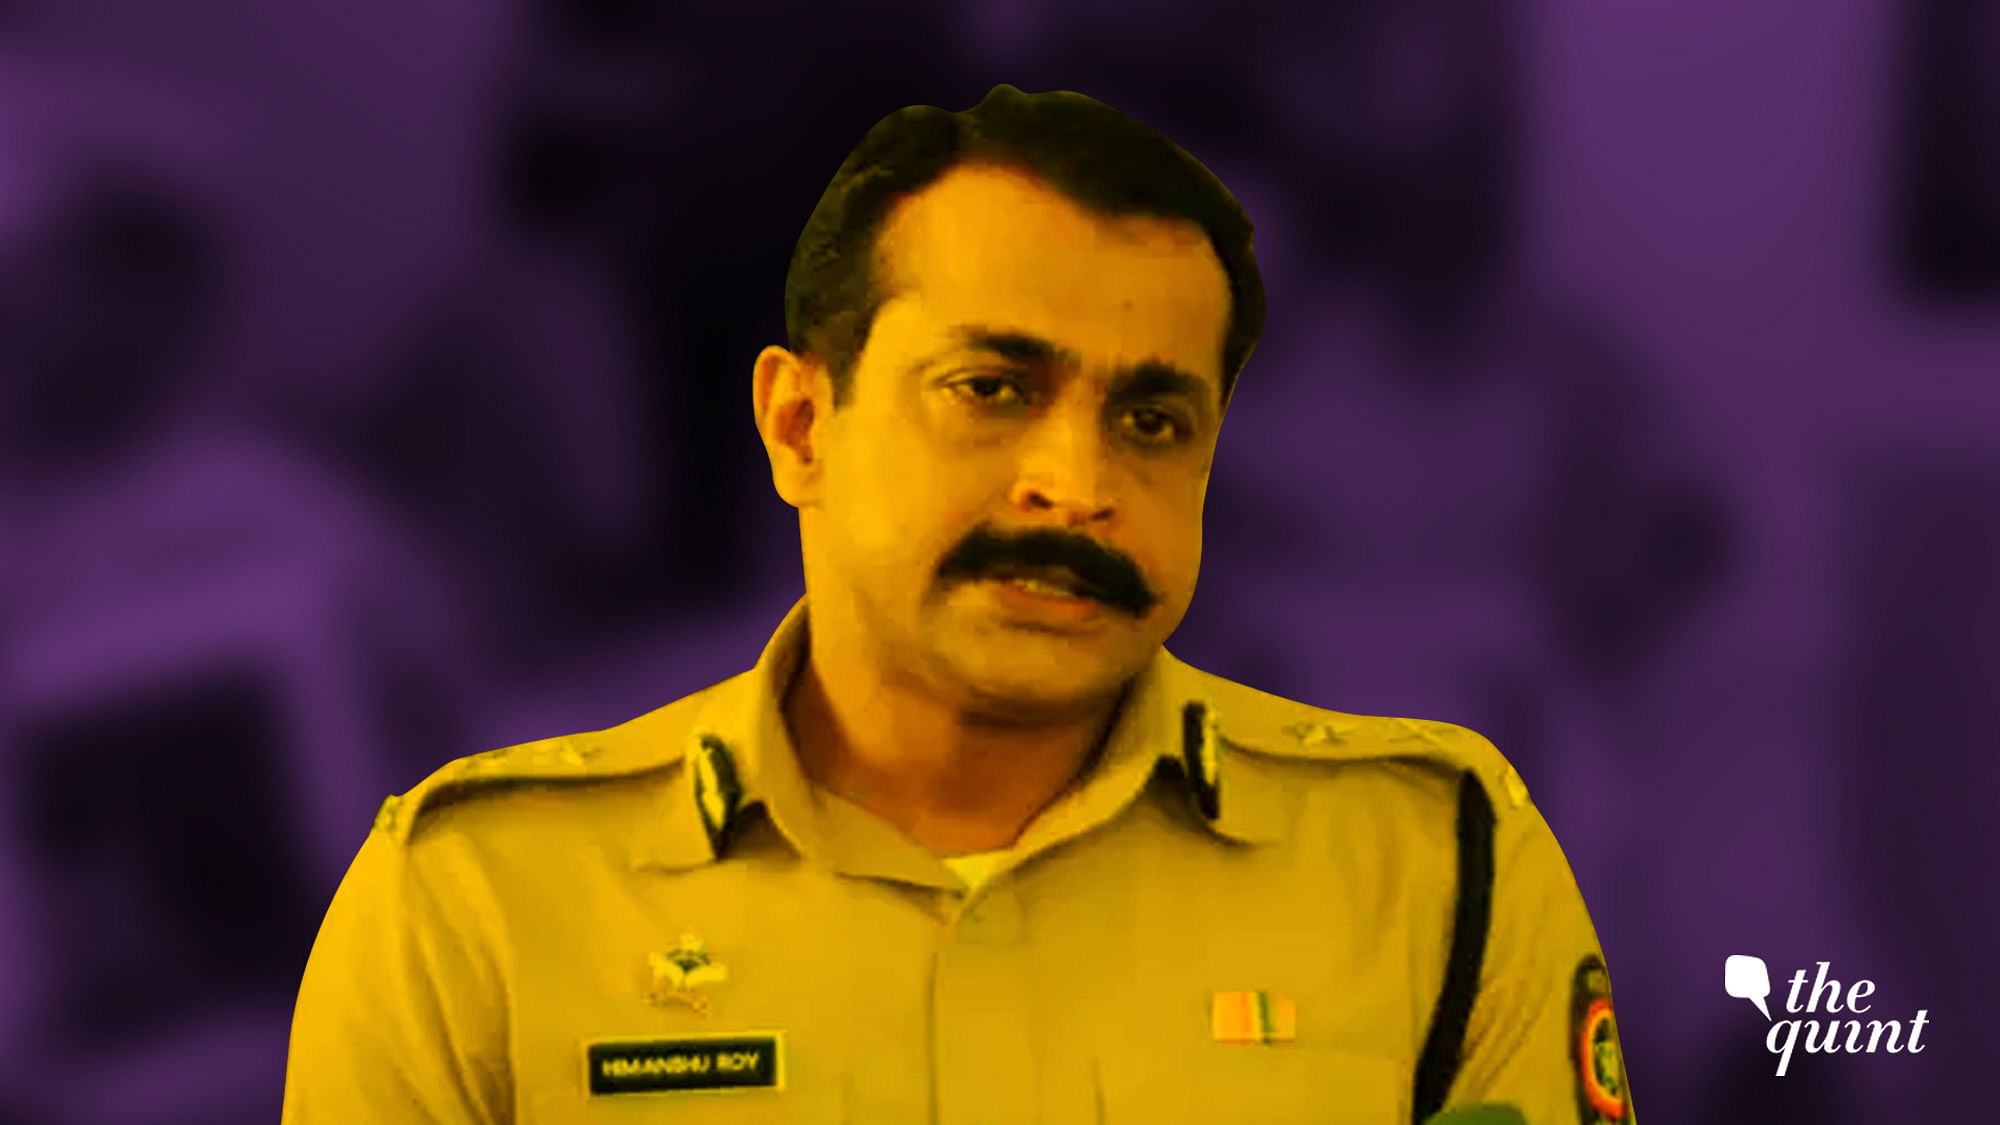 Former Mumbai IPS Himanshu Roy committed suicide by shooting himself at his residence on 11 May.